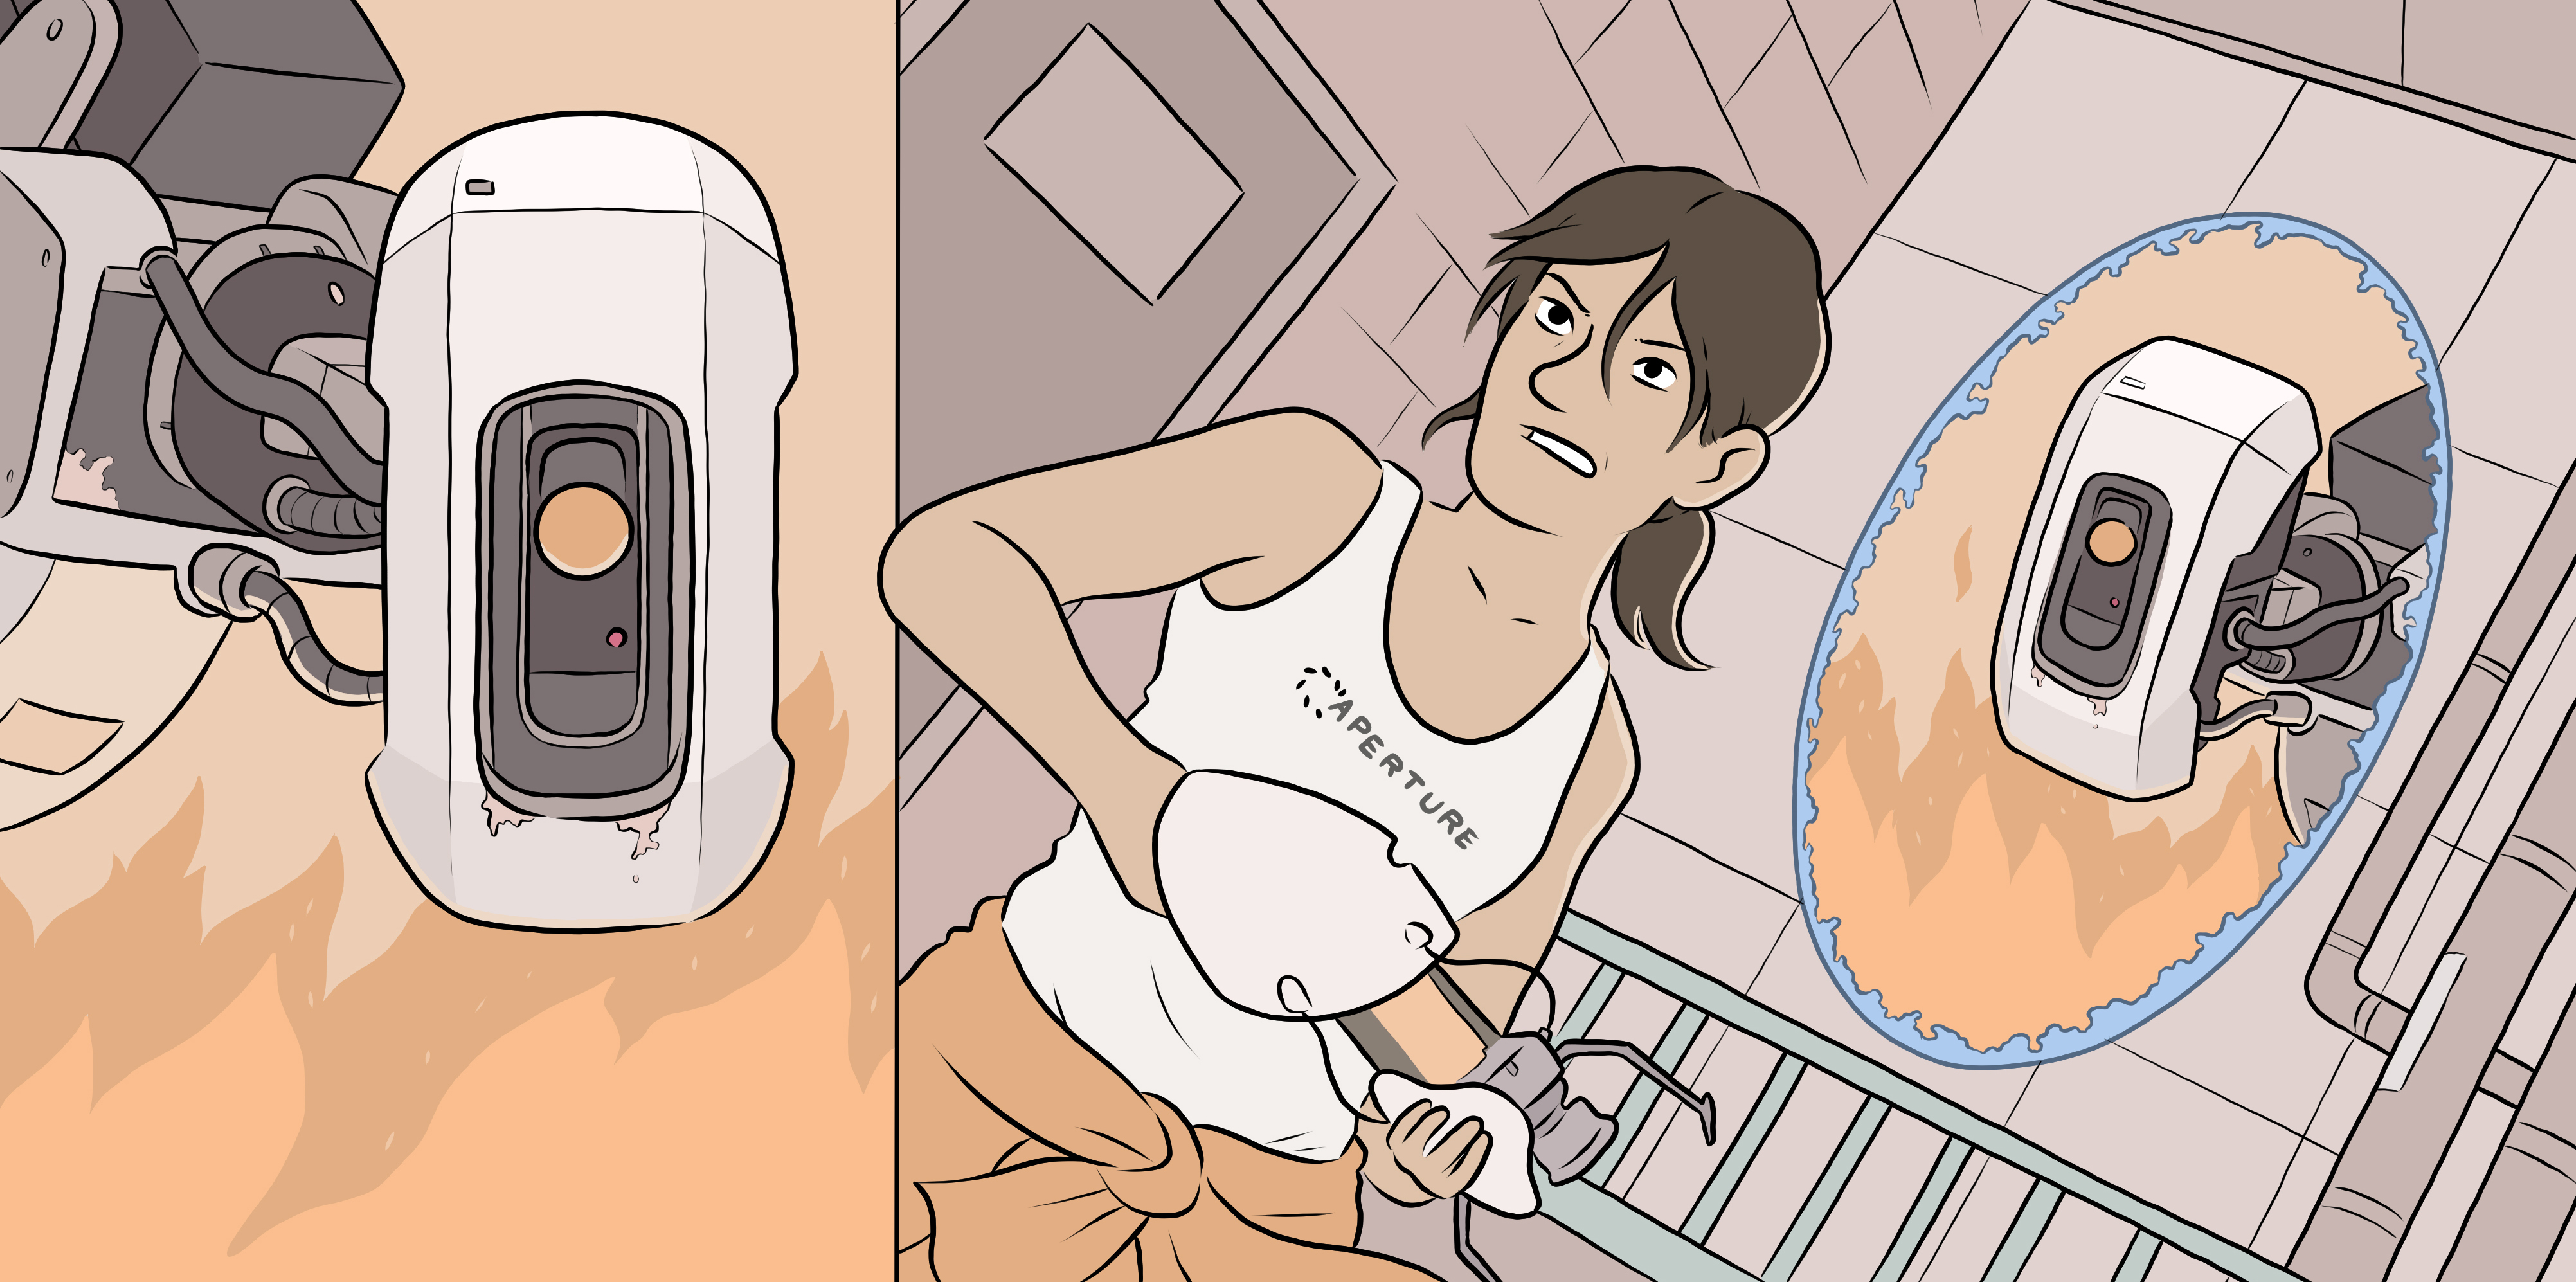 Image of Chell from Portal escaping GLADOS